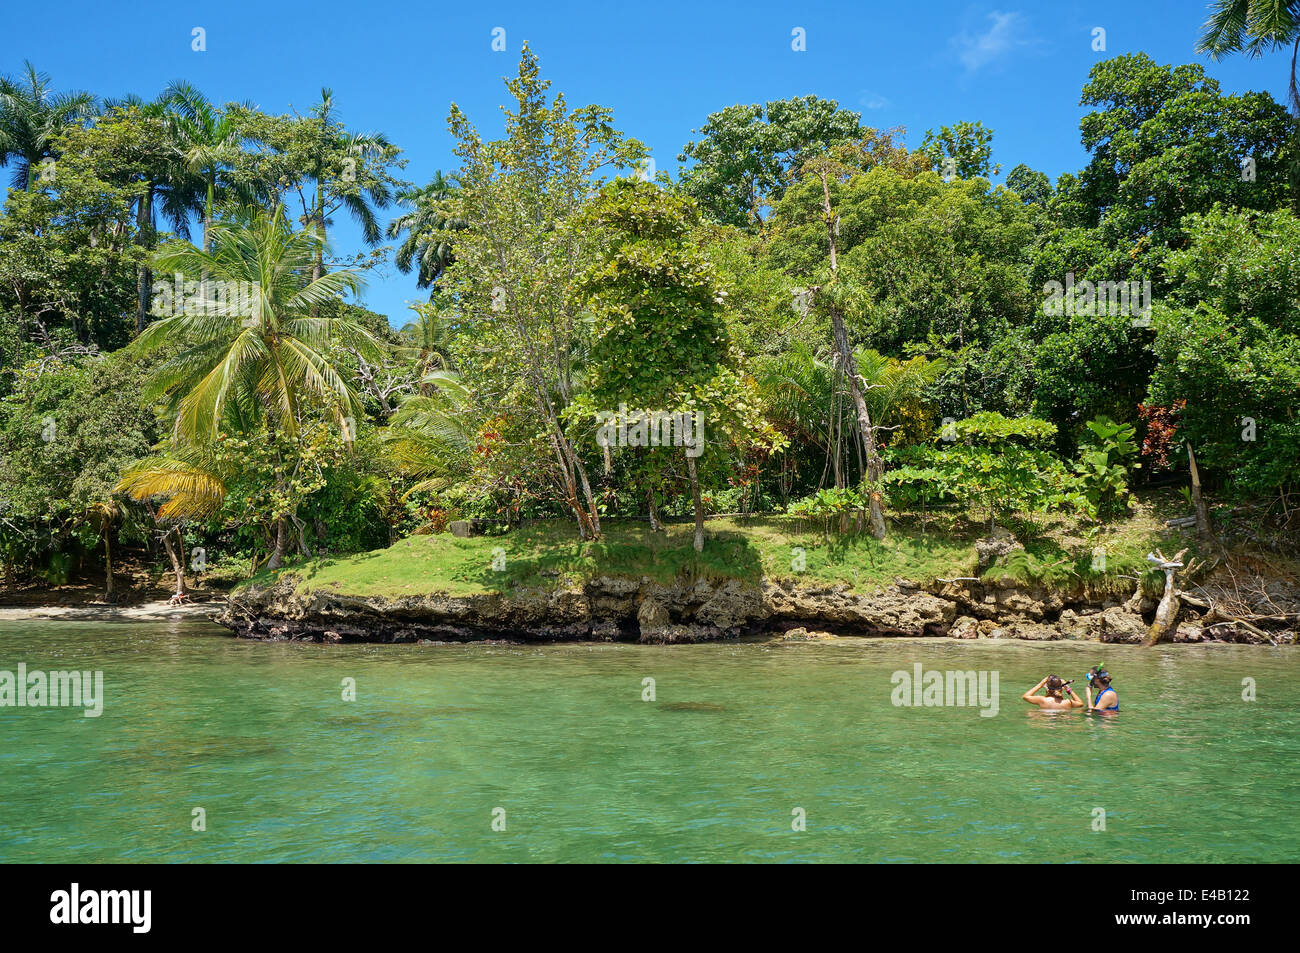 Two people snorkel in the sea and looking tropical shore with lush vegetation, Caribbean, Bocas del Toro, Panama Stock Photo